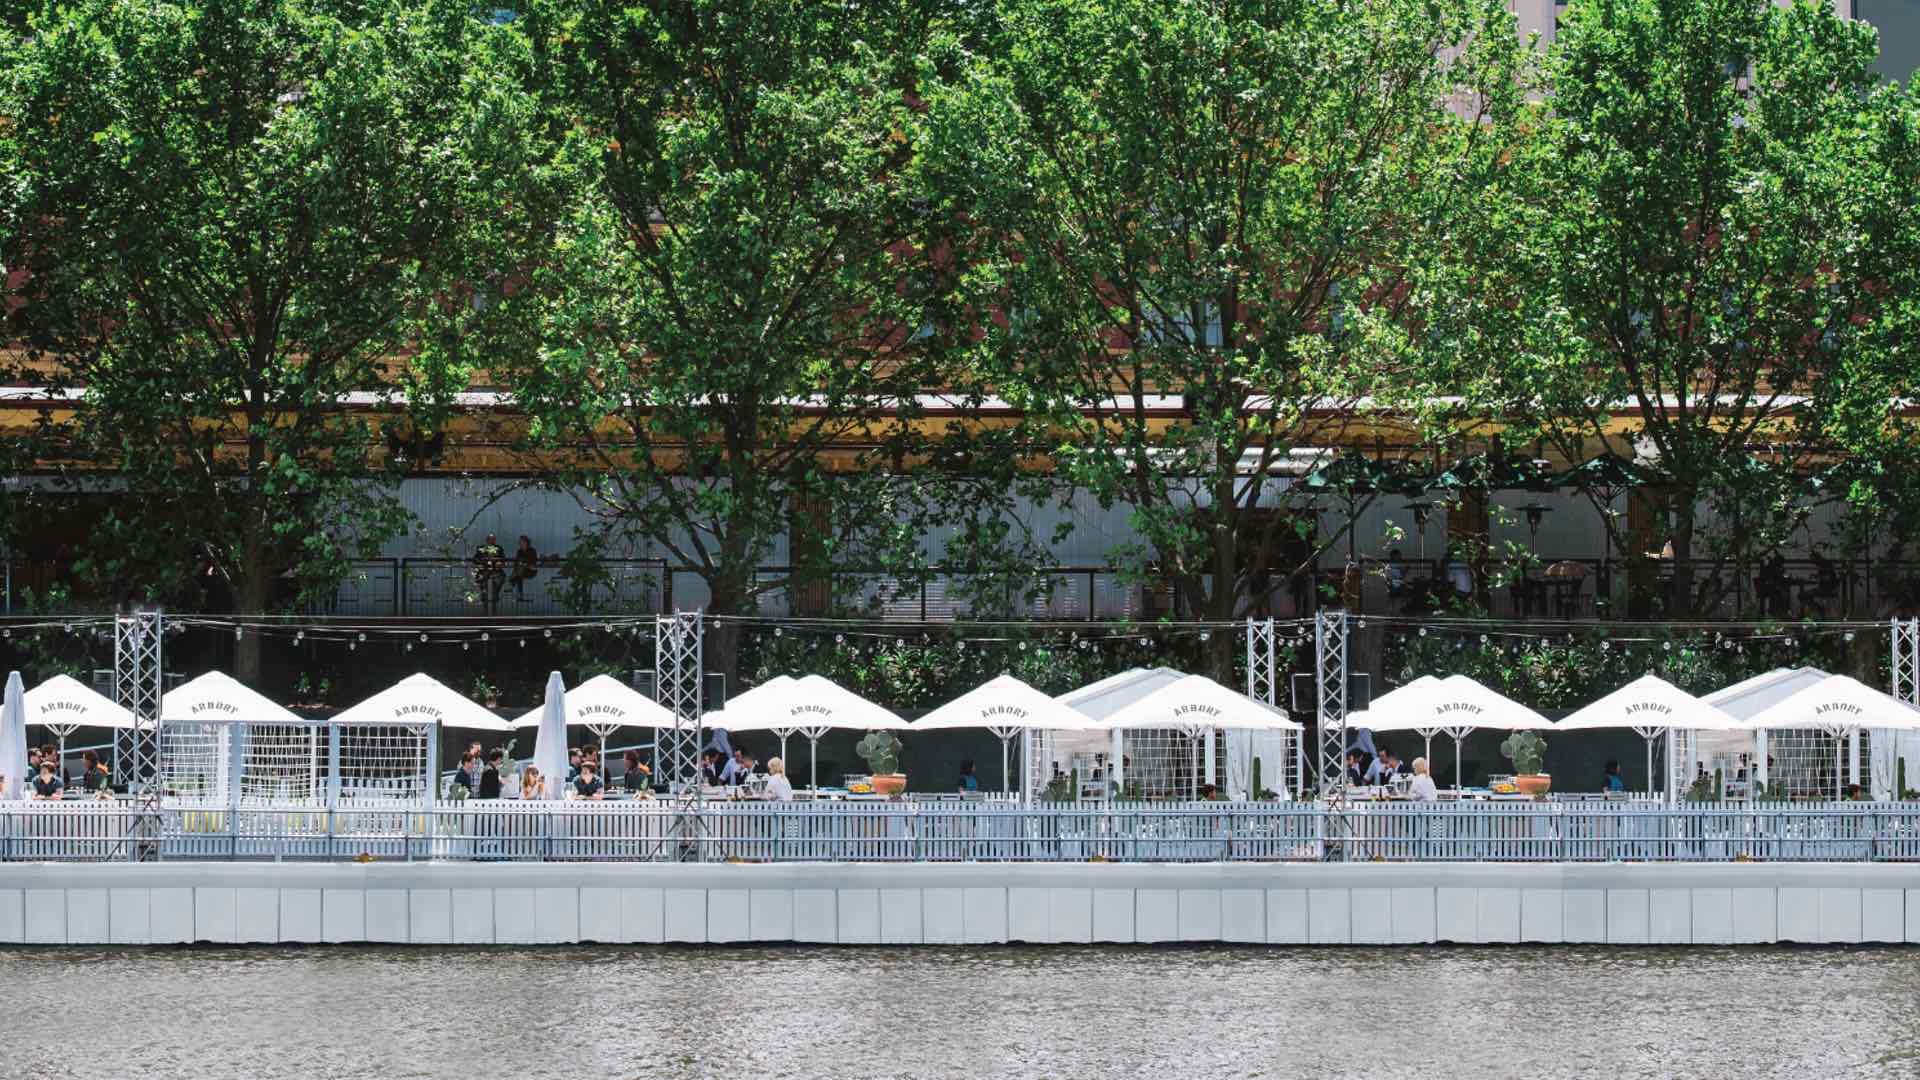 Arbory's Floating Bar Returns to the Yarra for Another Season